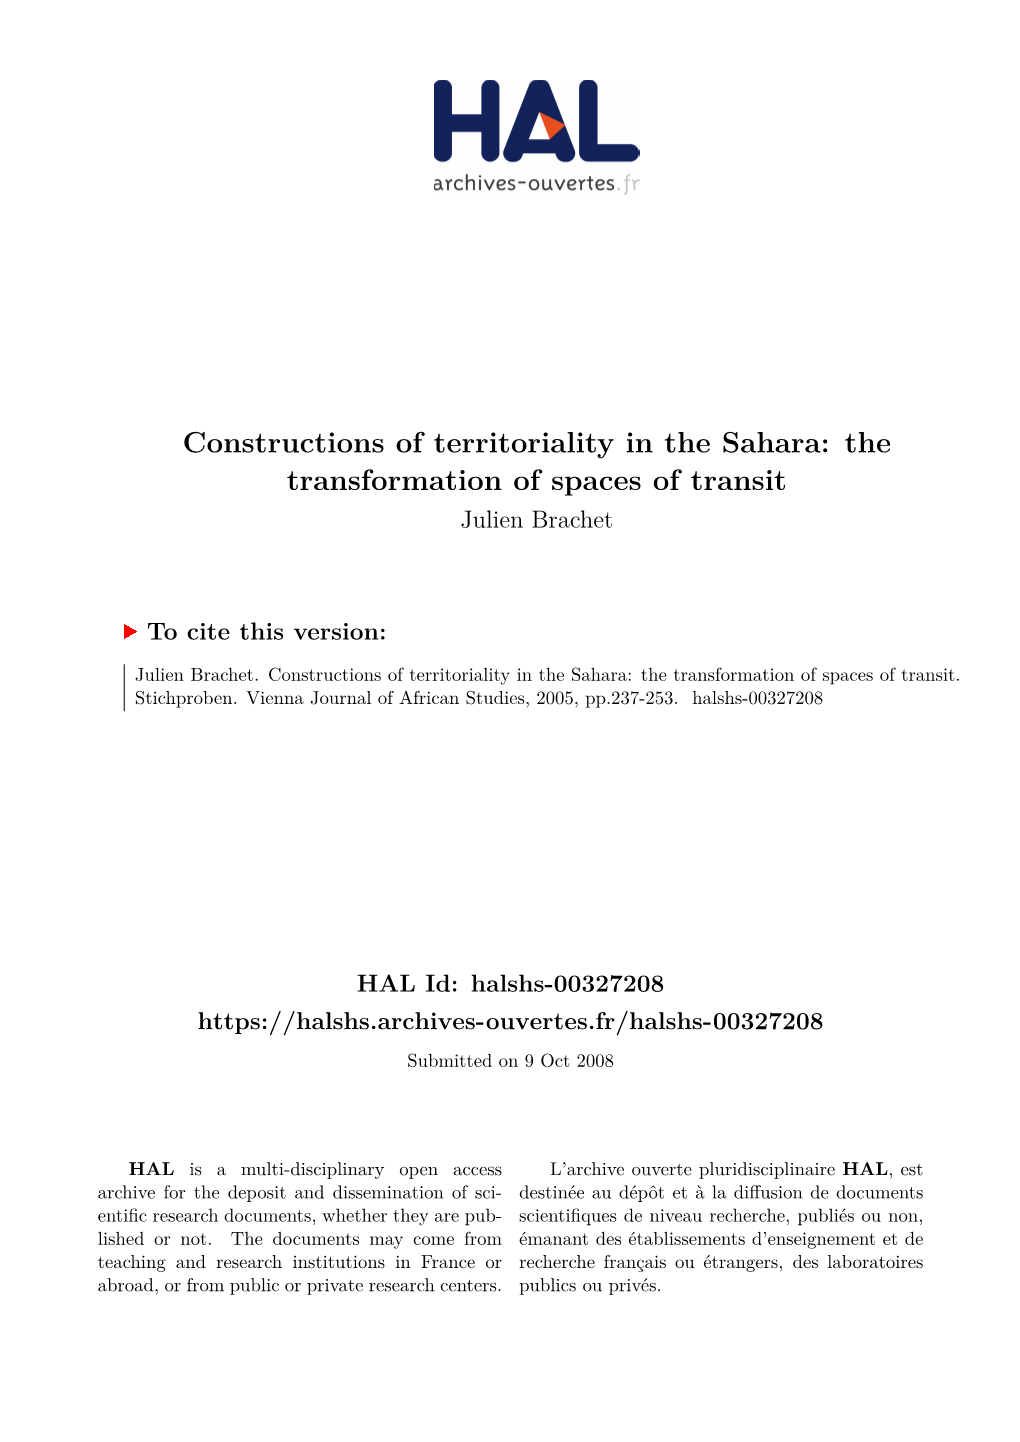 Constructions of Territoriality in the Sahara: the Transformation of Spaces of Transit Julien Brachet